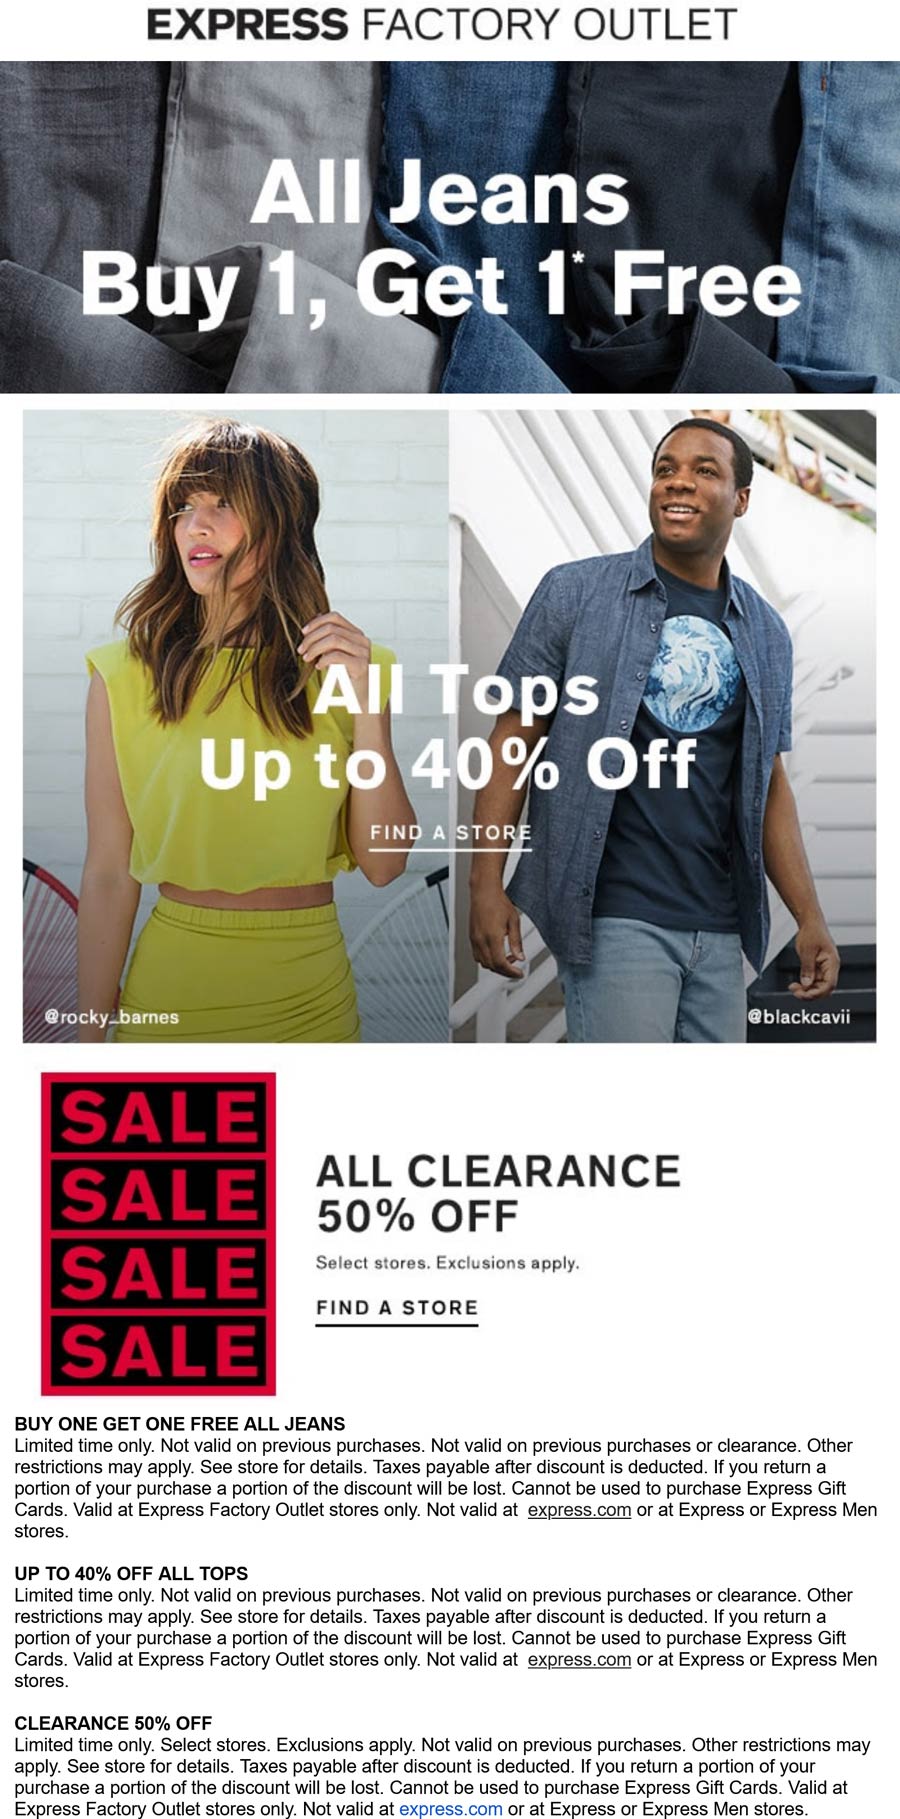 Express Factory Outlet stores Coupon  Second jeans free & more at Express Factory Outlet #expressfactoryoutlet 